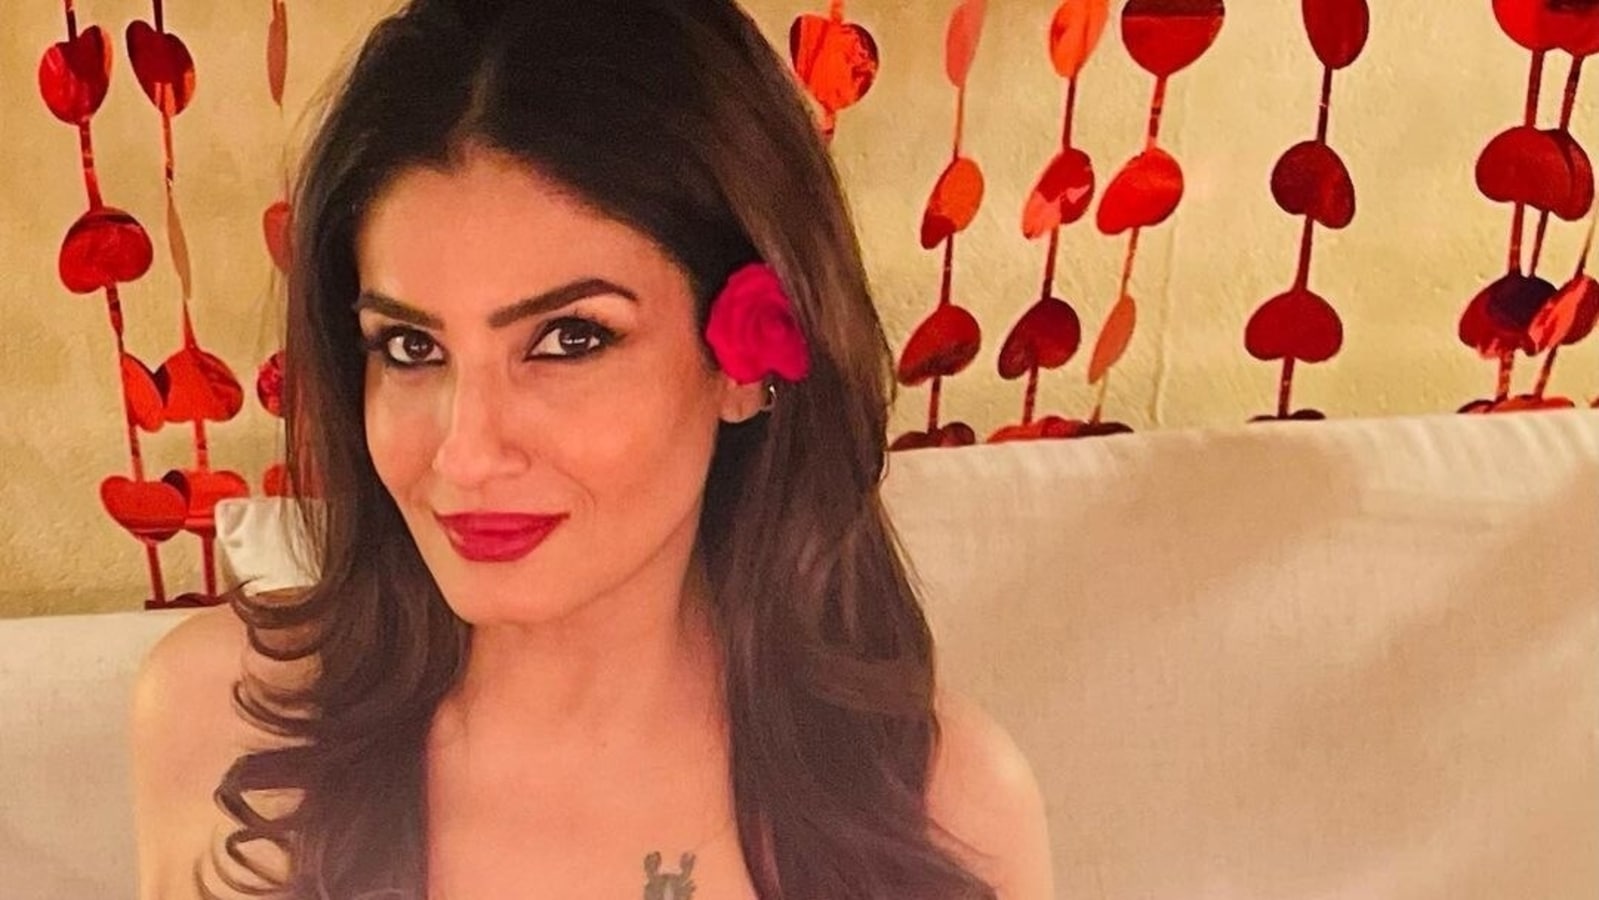 Raveena Tandonxxxx - Raveena Tandon slips into a red dress and poses with red roses, jokes about  it | Bollywood - Hindustan Times